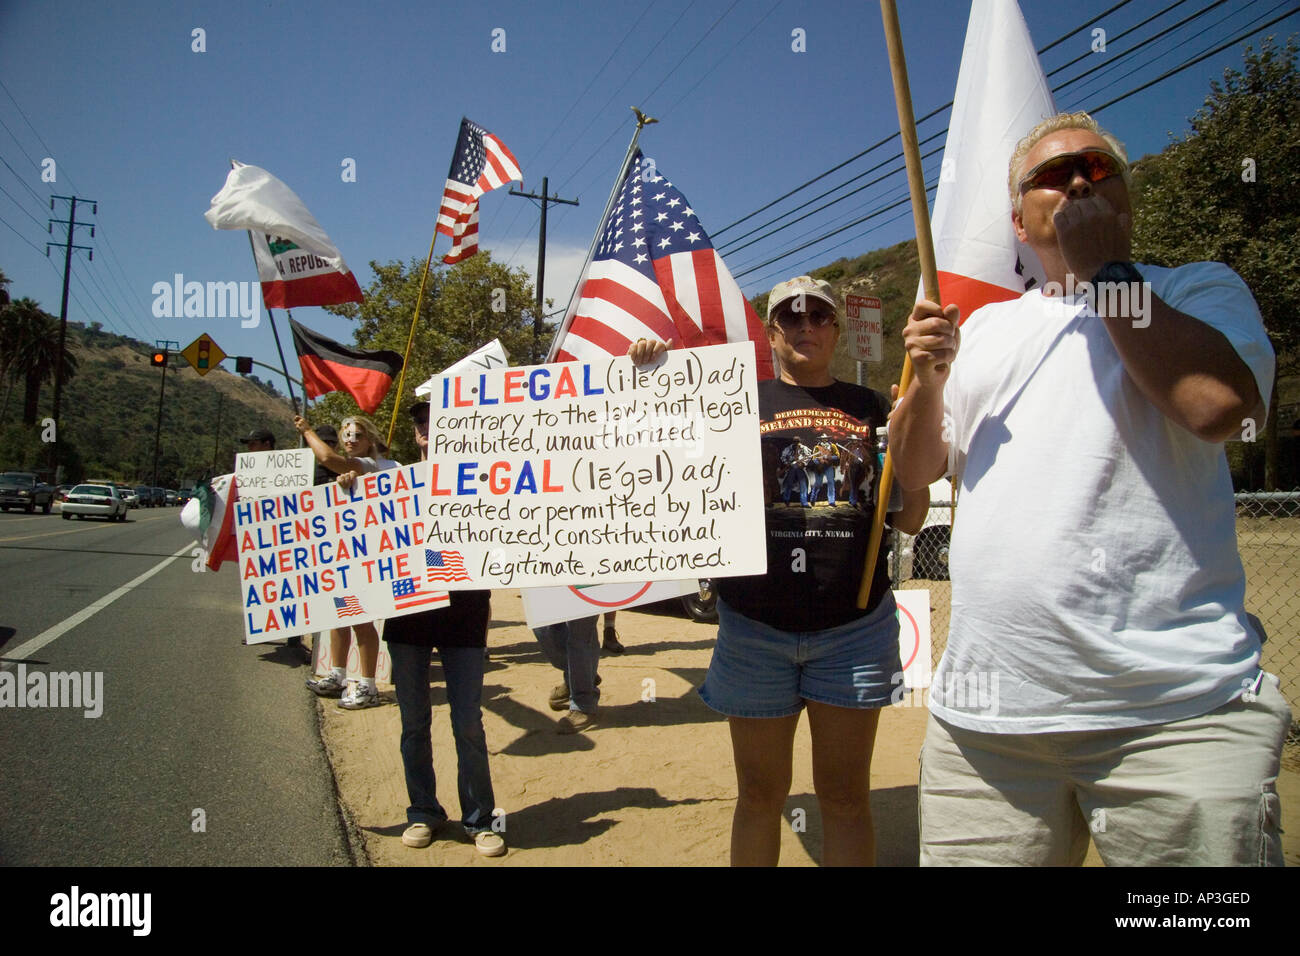 Counter demonstrators at a rally  supporting Hispanic day laborers at a hiring site in Laguna Beach, CA. Stock Photo